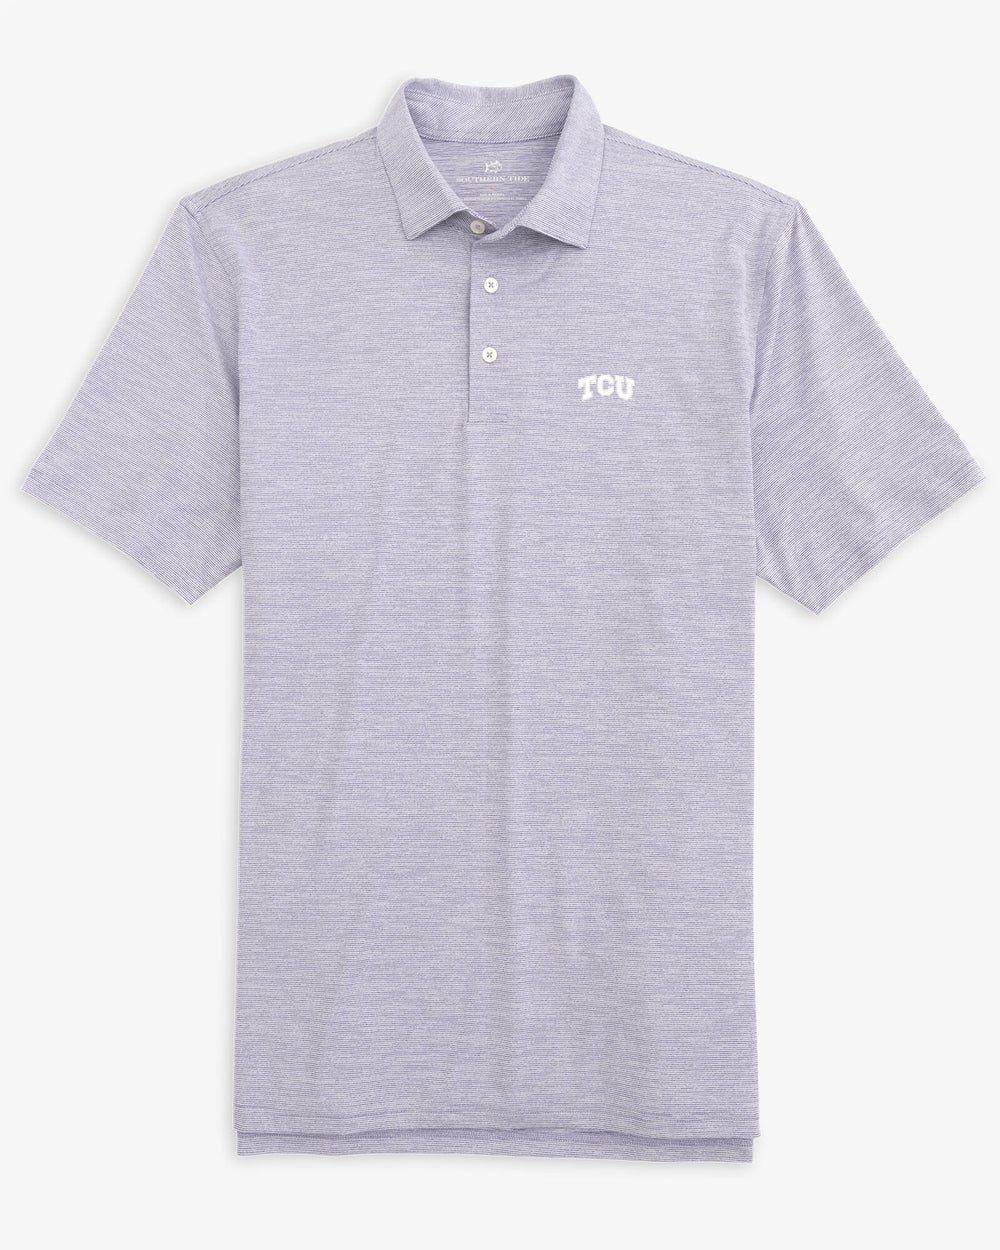 The front view of the TCU Horned Frogs Driver Spacedye Polo Shirt by Southern Tide - Regal Purple